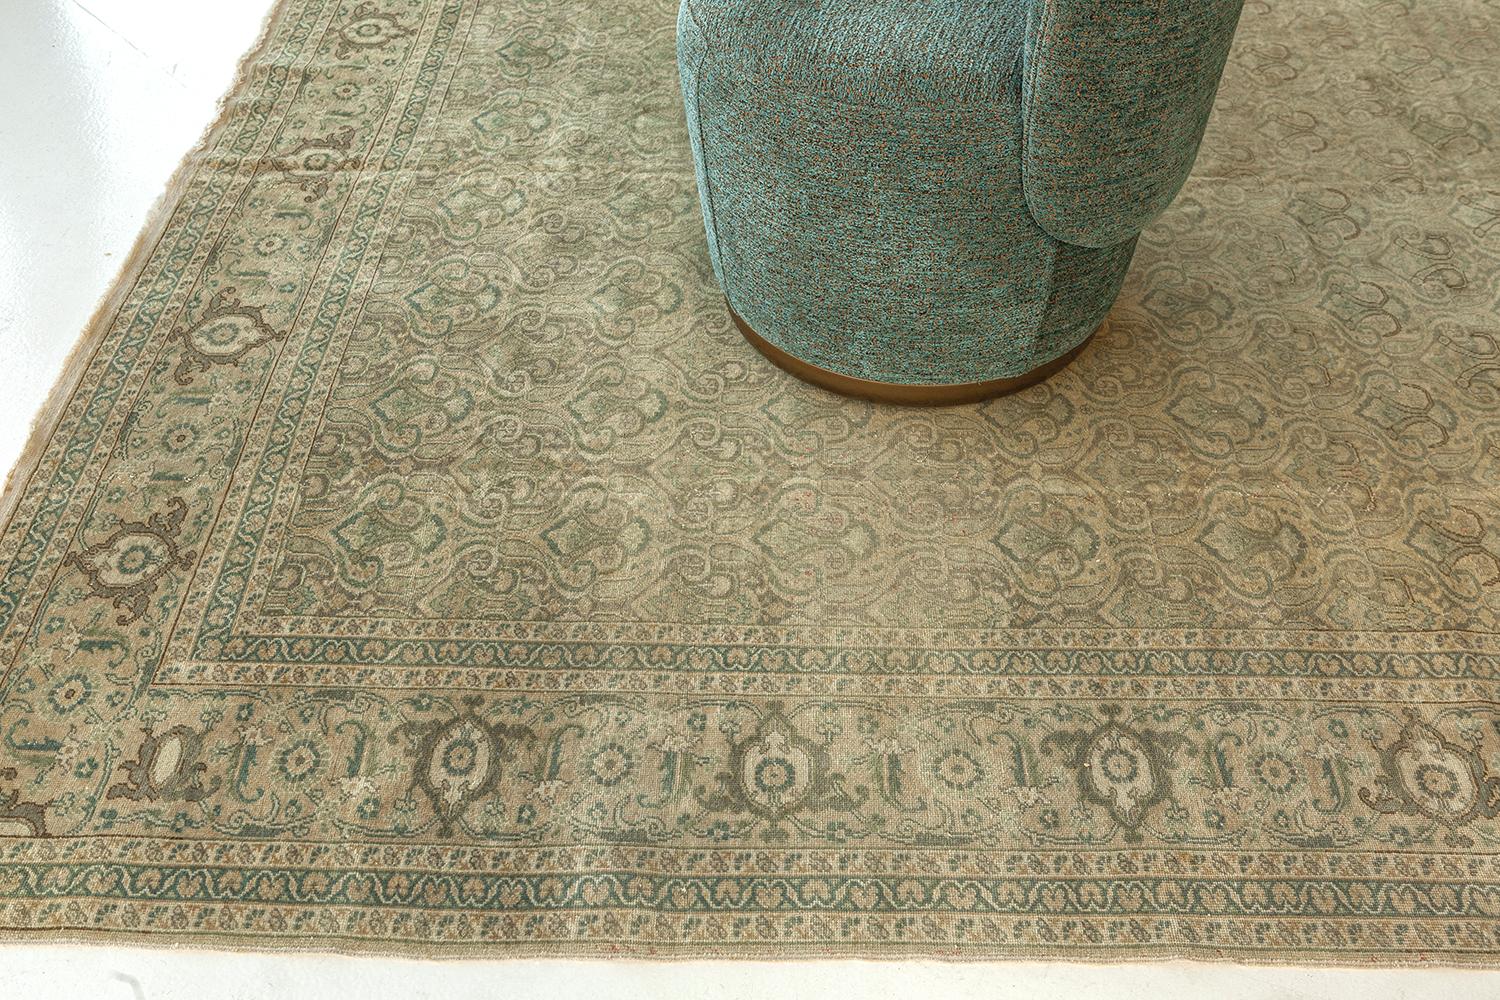 Showcasing timeless elegance in a muted color palette, this Vintage Turkish Anatolian rug features an all-over pattern of stylized florals in shades of beige, ecru, and hazelnut. Natural abrash gradations substantiate this gorgeous vintage rug and